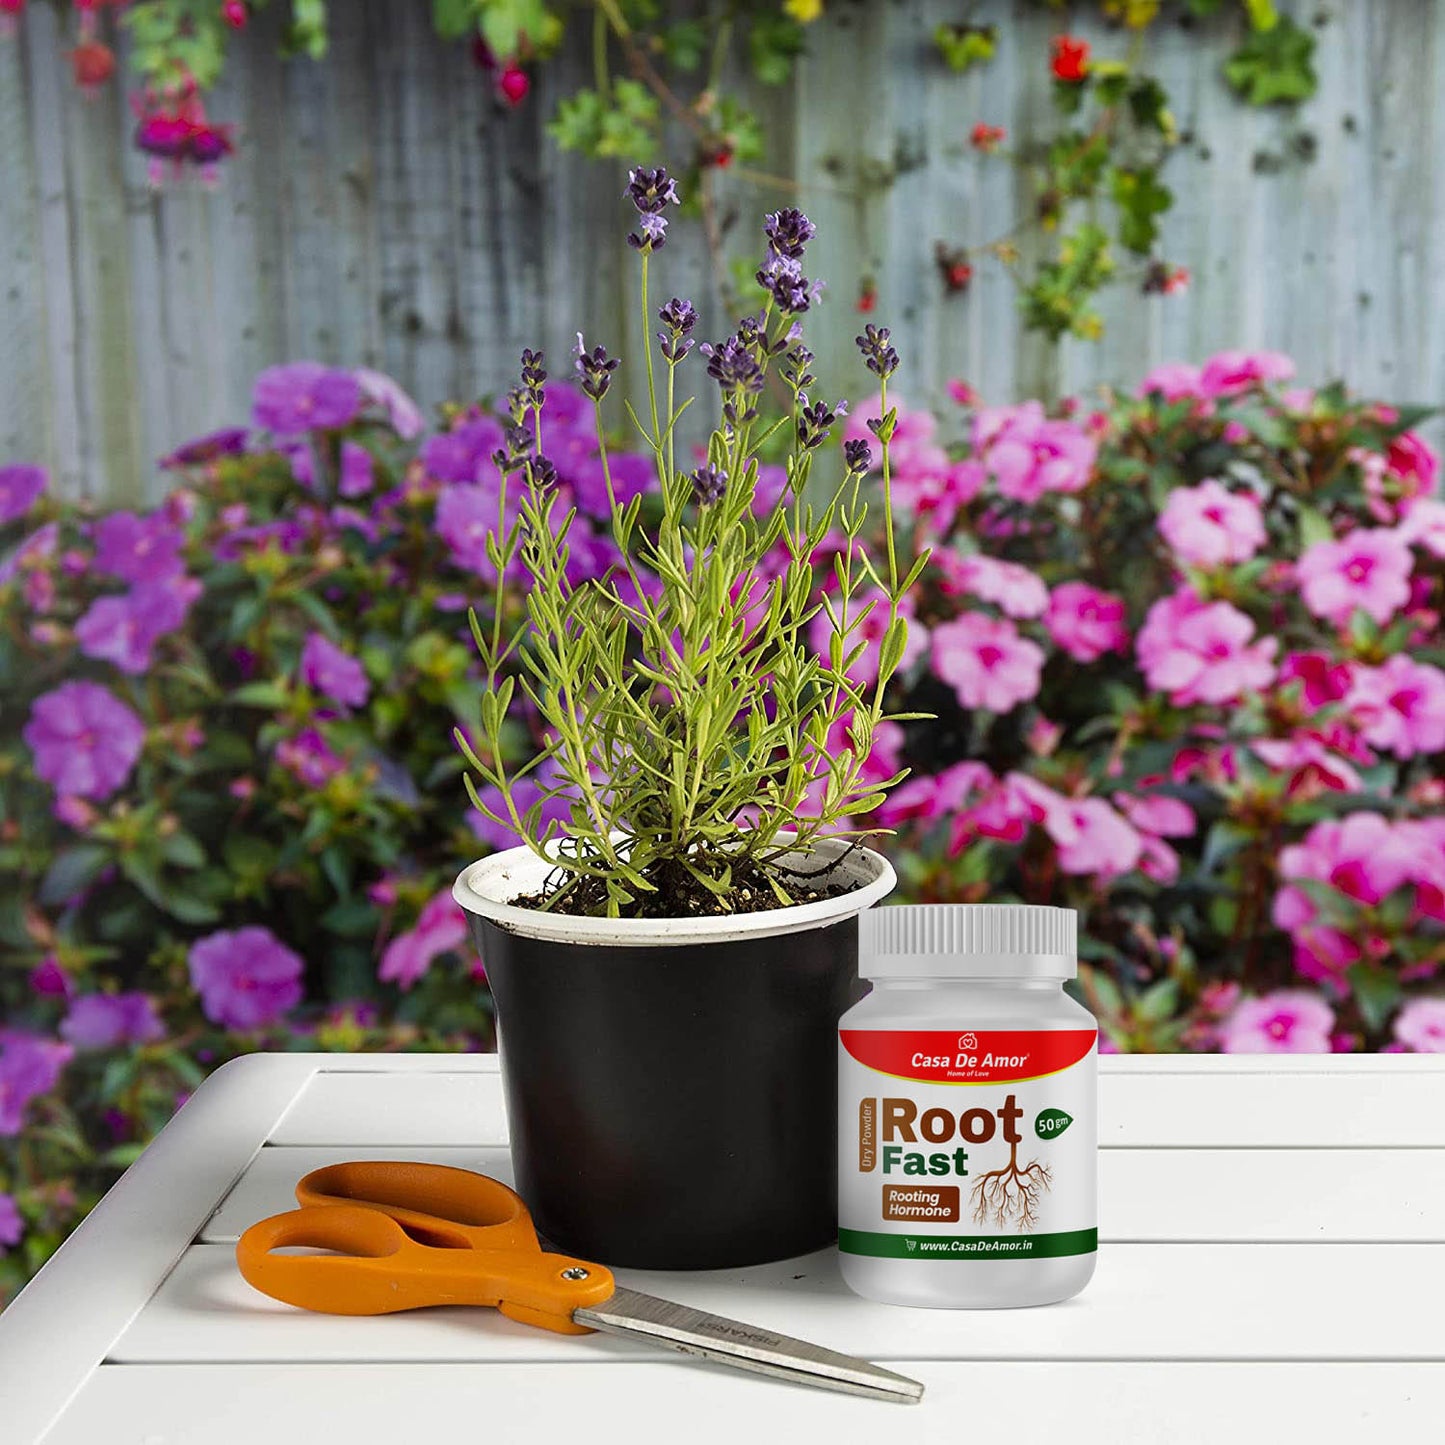 Casa De Amor Root Fast Rooting Hormone, Promotes Rooting, Grow New Plants from Cuttings